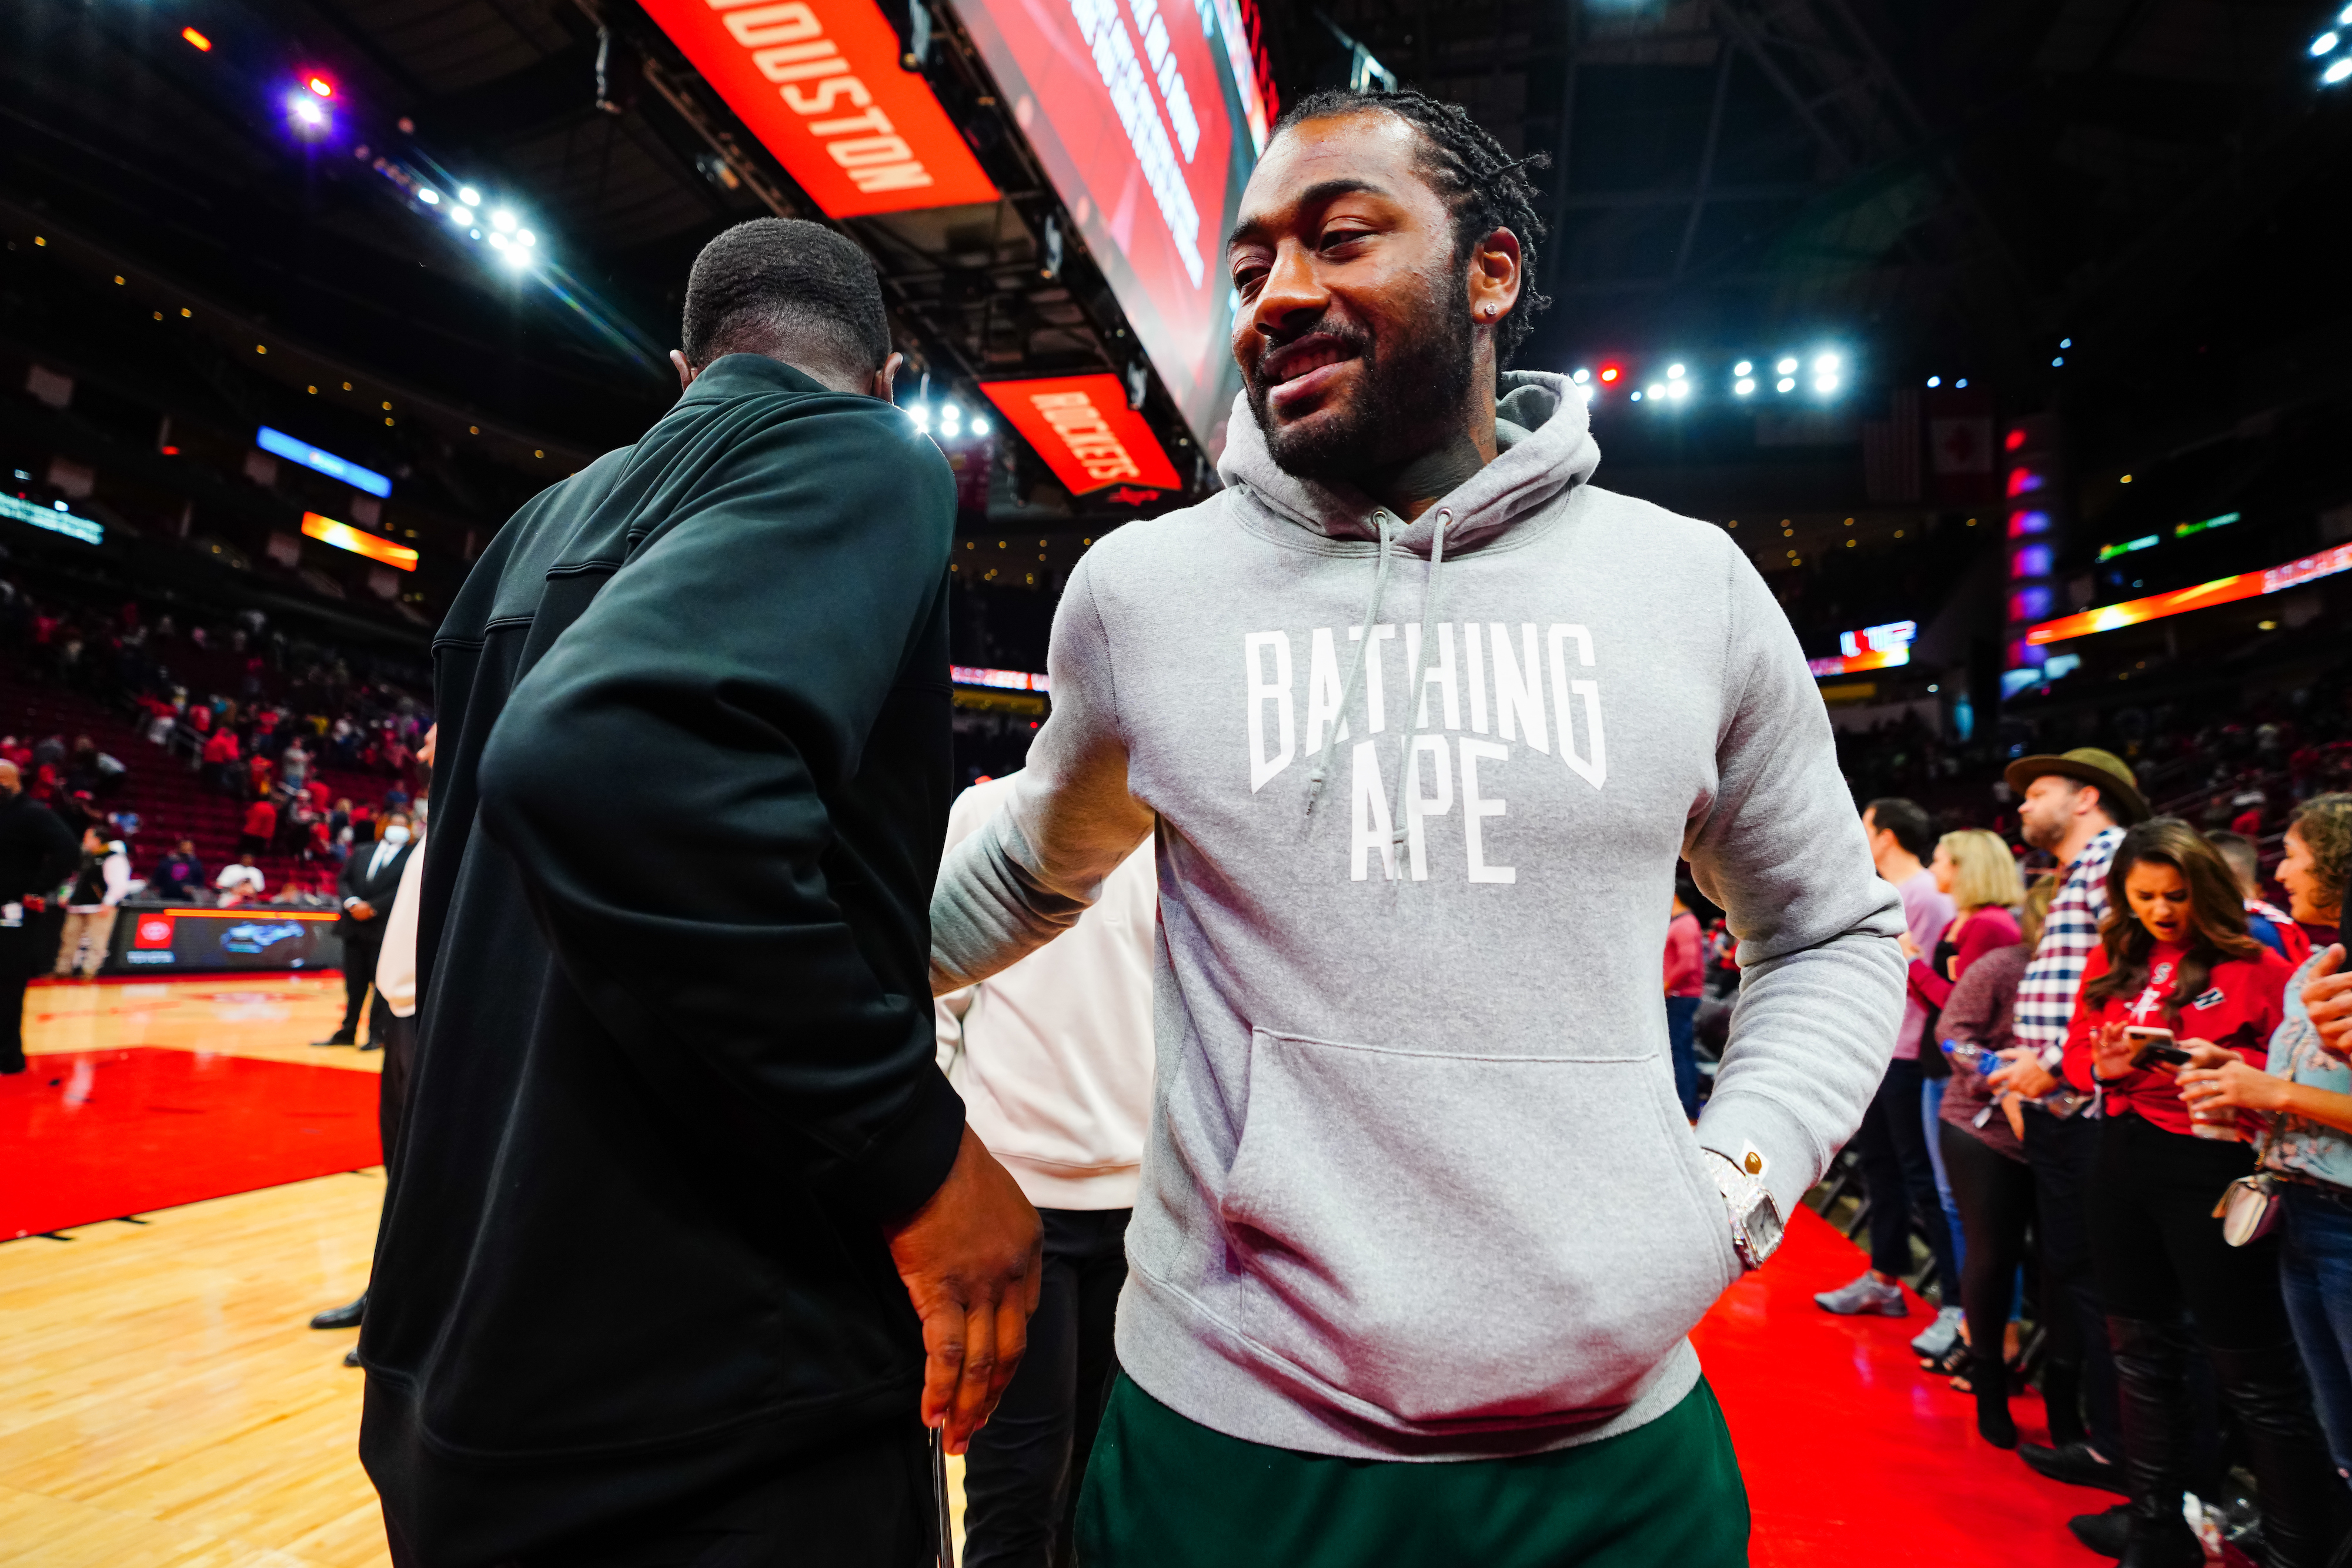 Houston Rockets guard John Wall on the sidelines during an NBA game in December 2021